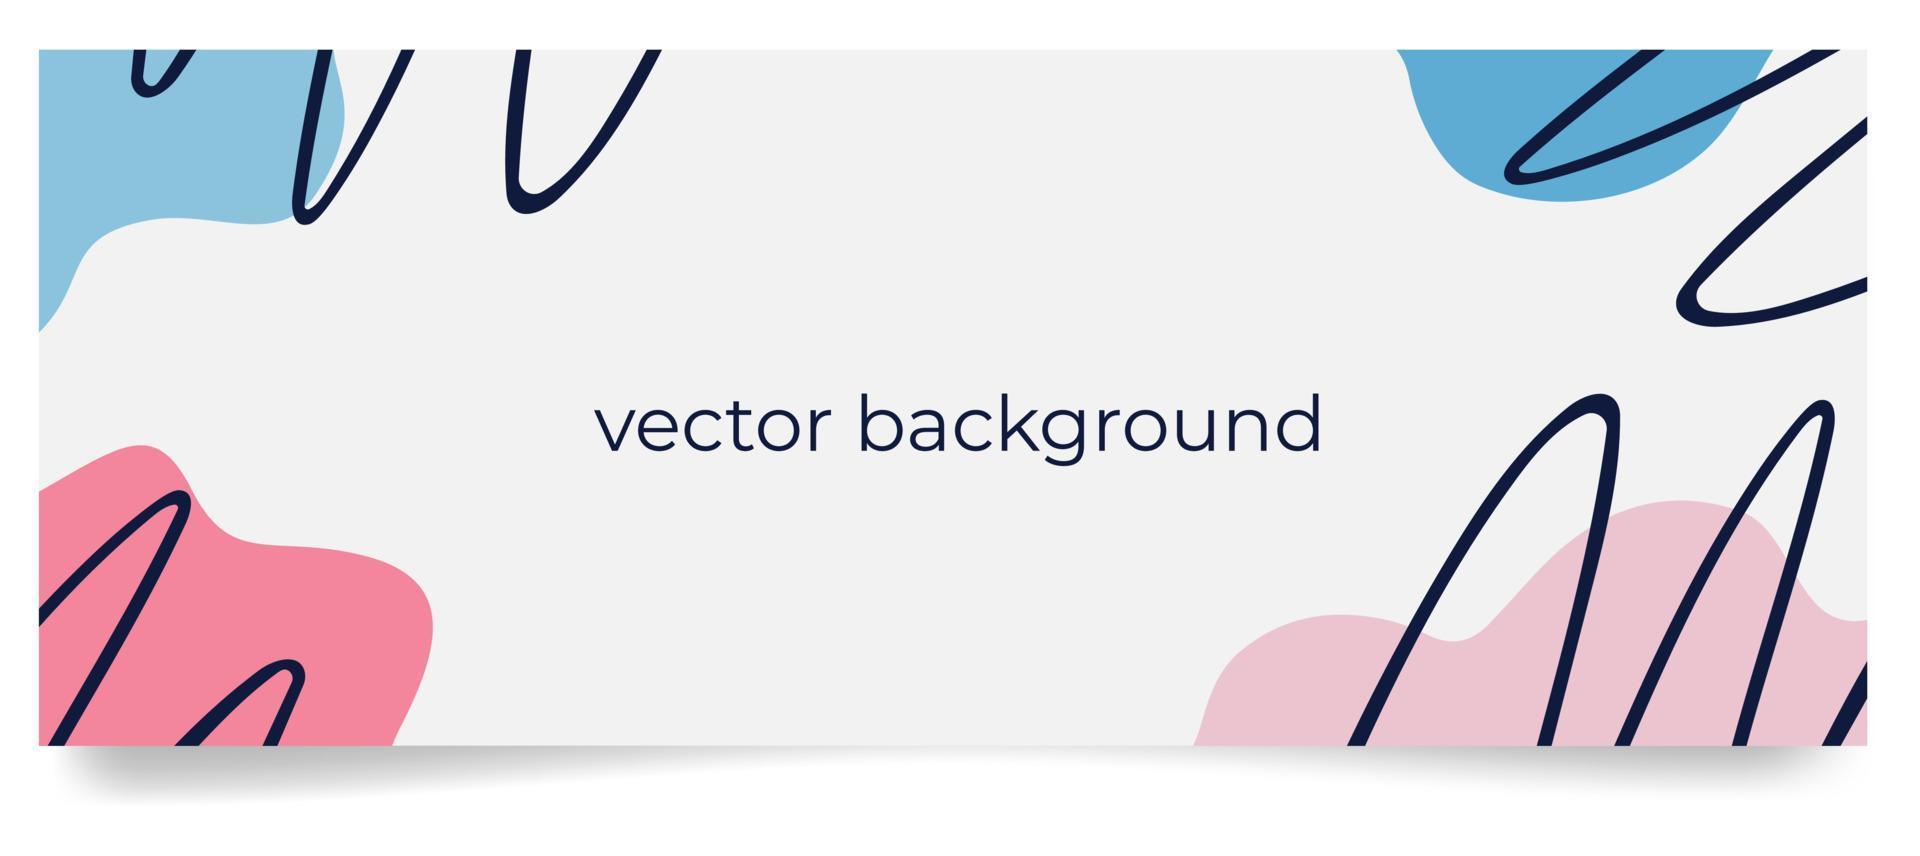 Vector background with abstract hand-drawn spots. Horisontal banner template. Vector illustration